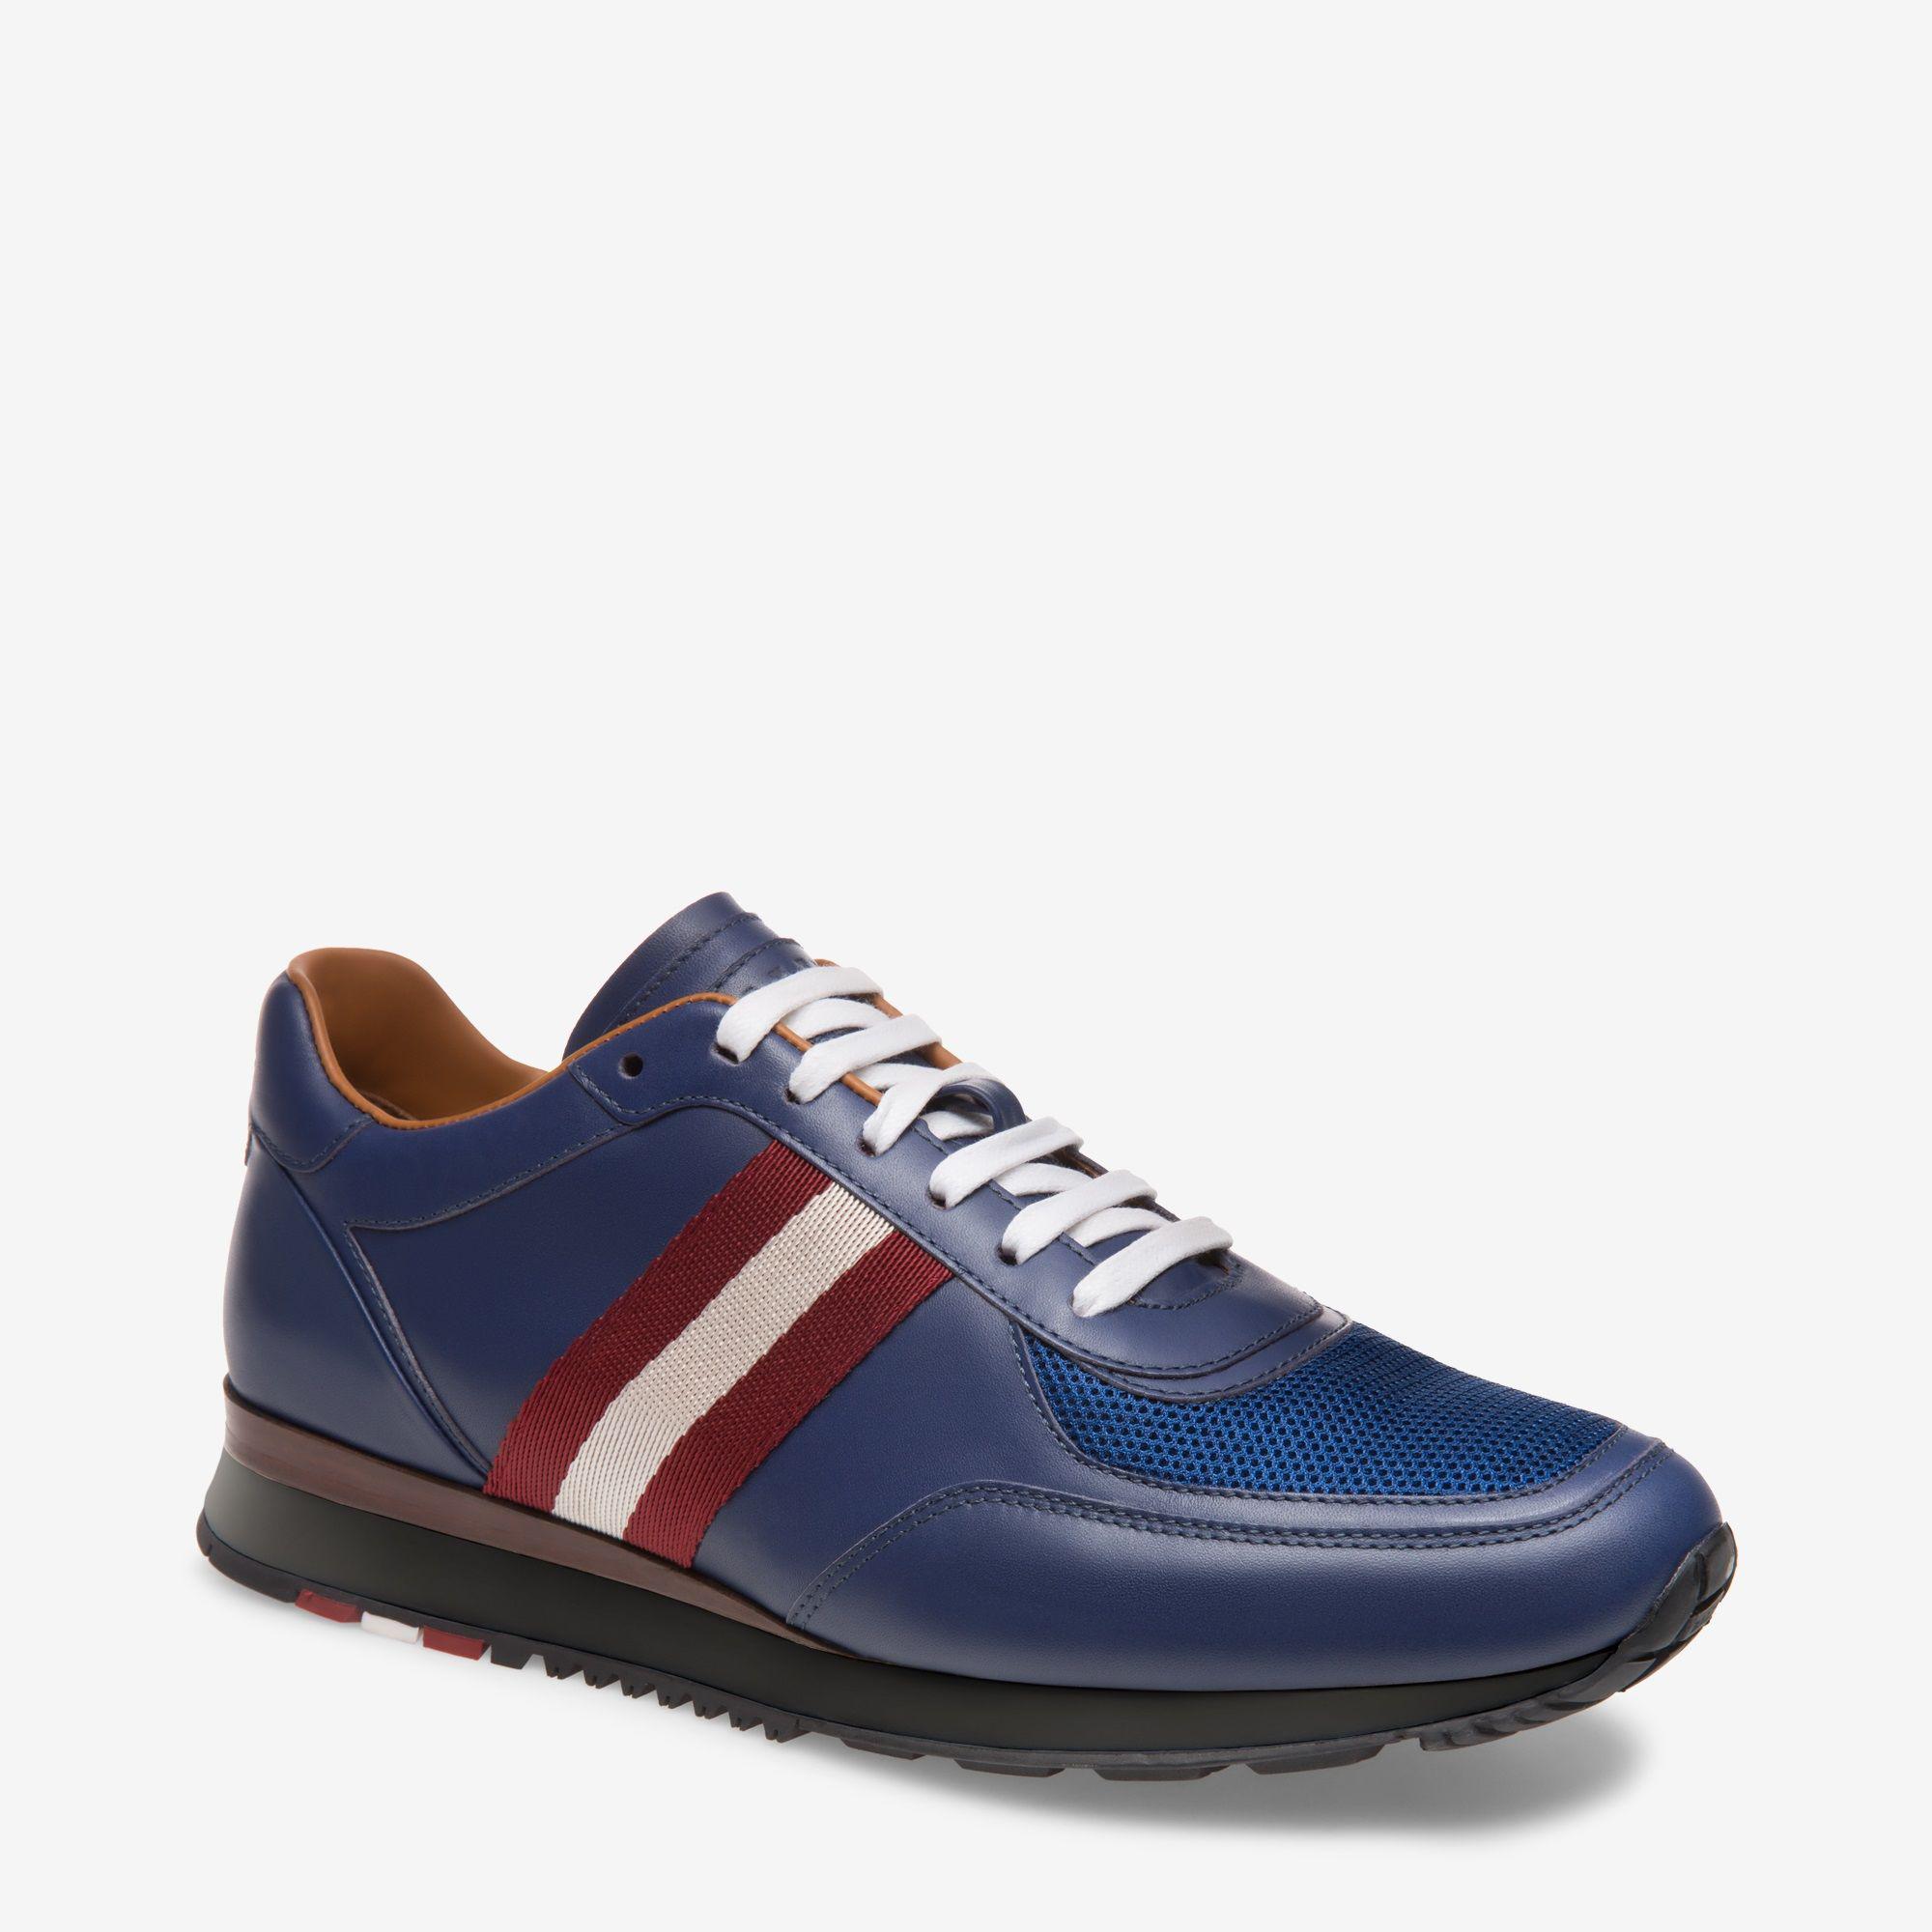 Bally Leather Aston in Blue for Men - Lyst